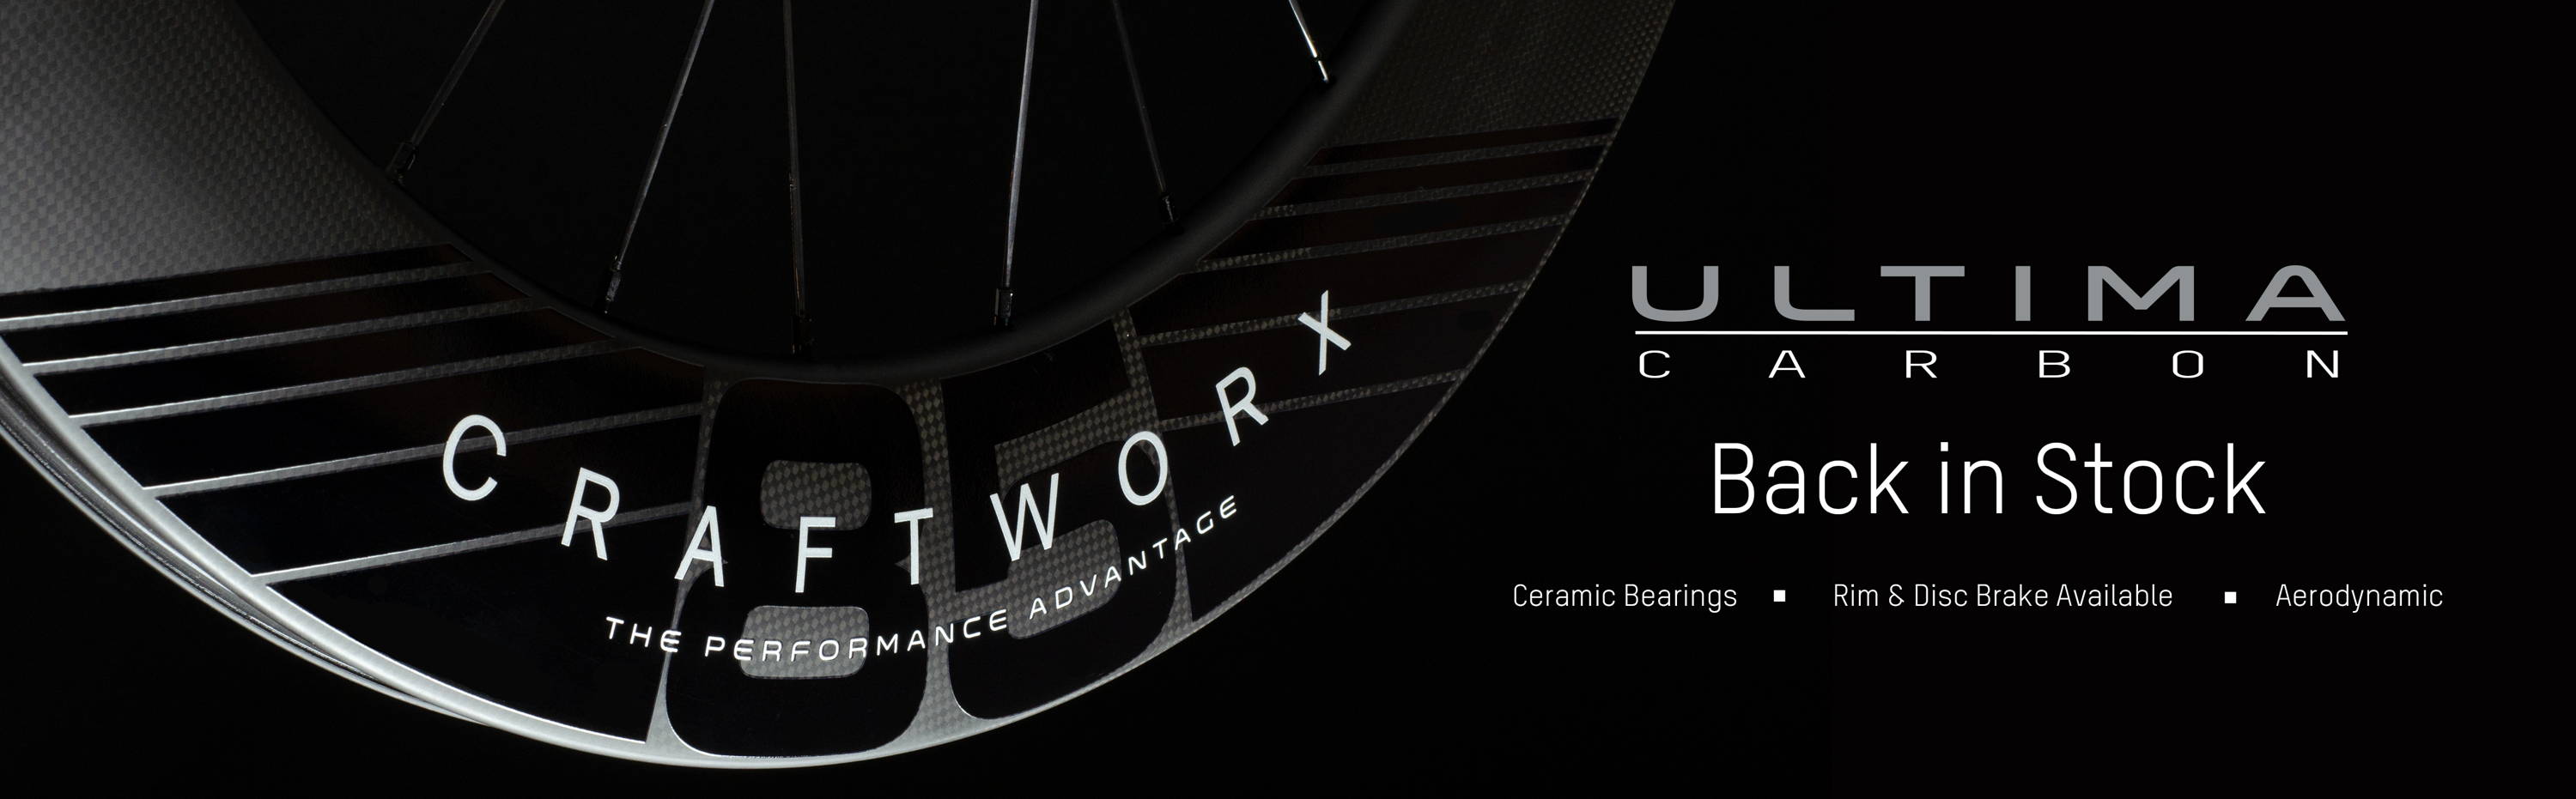 Craftwor Ultima Carbon Wheels Back in Stock